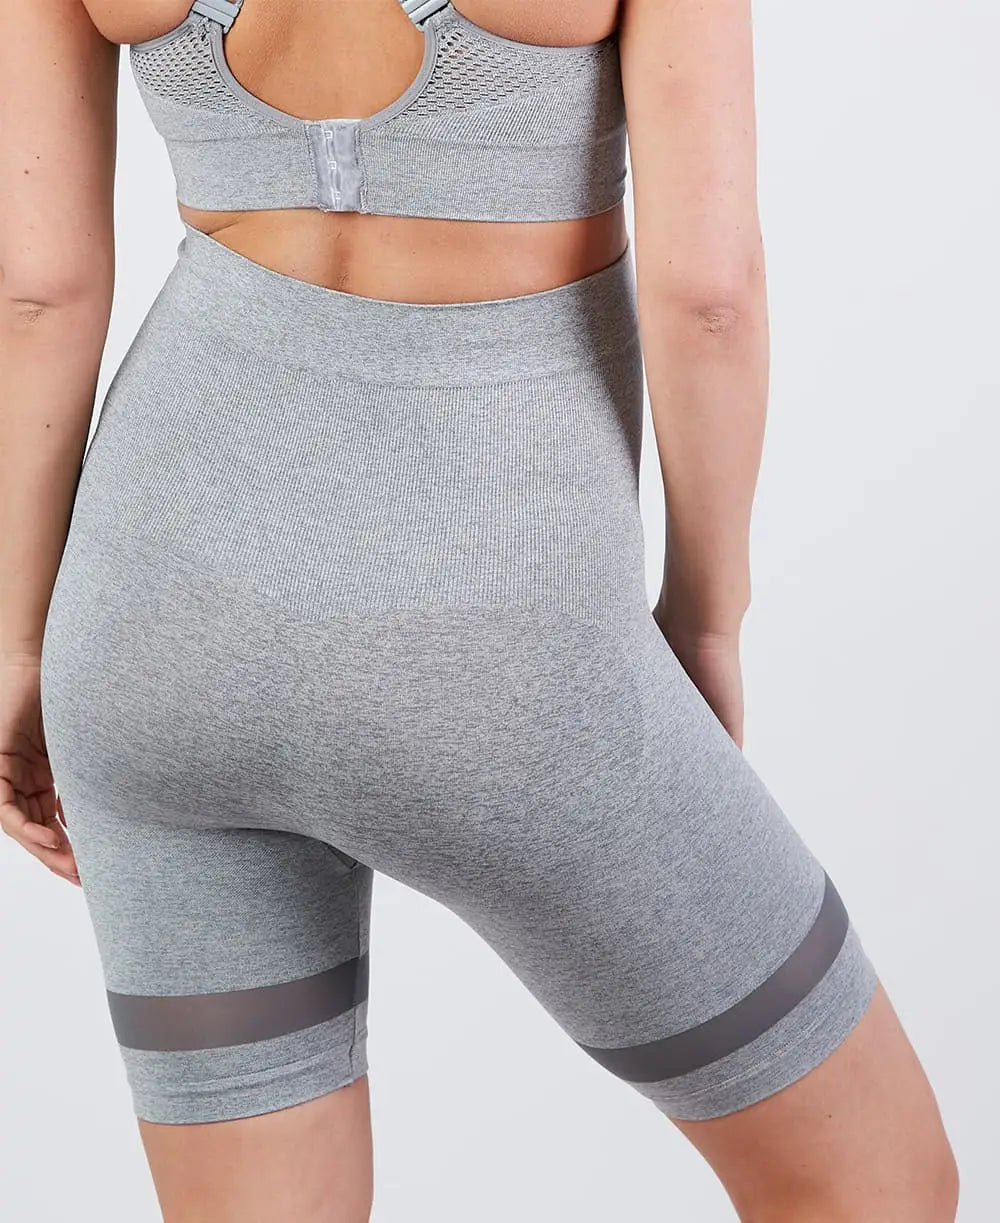 Sport and maternity panty Woma grey - Legging